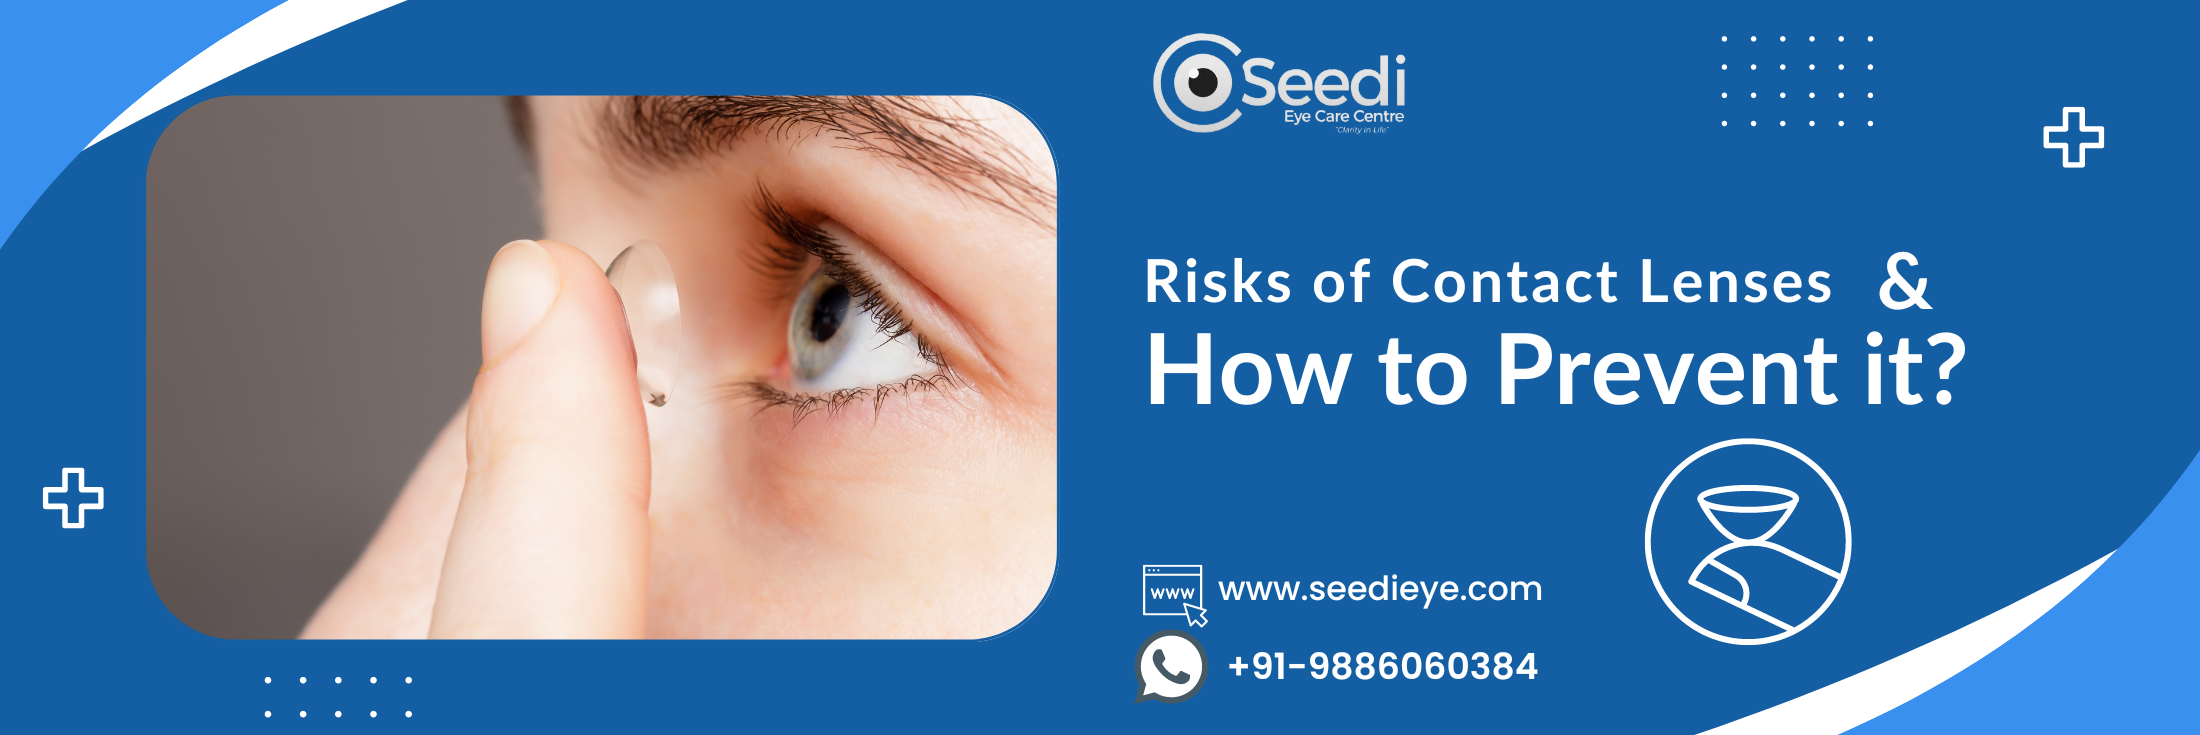 risks-of-using-contact-lenses